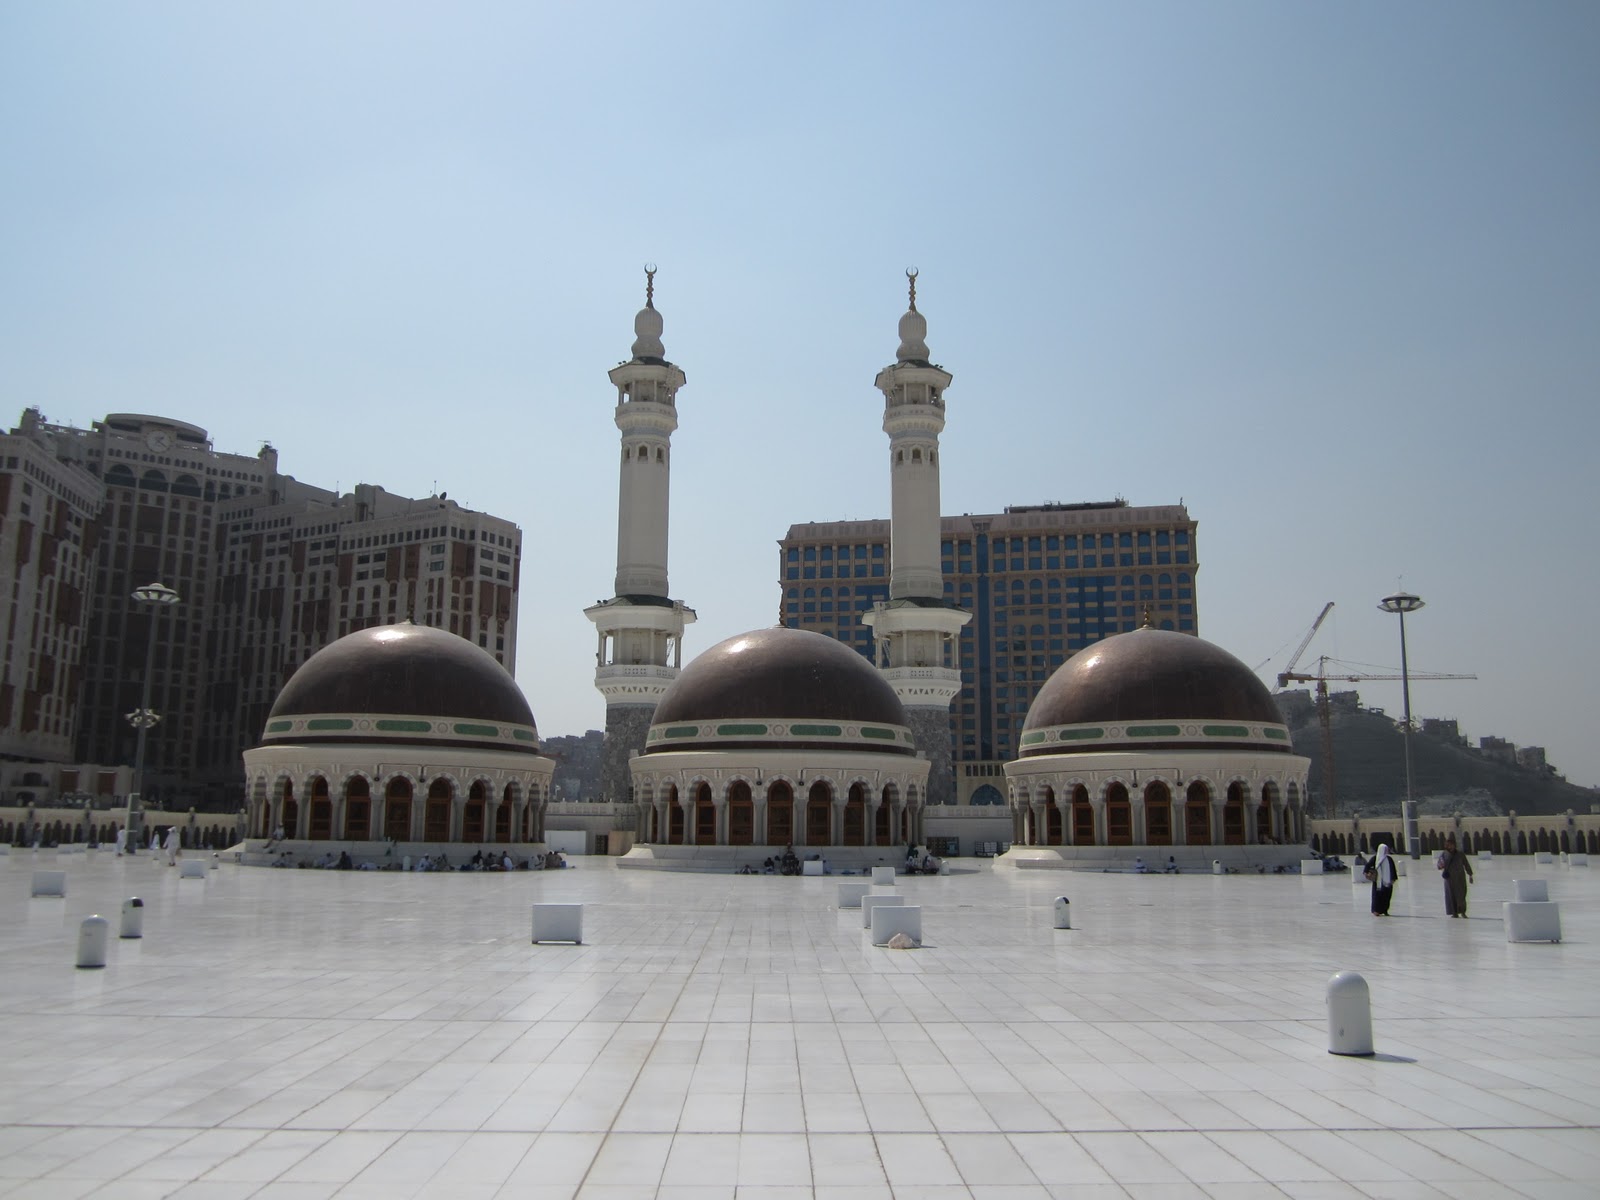 Pictures of Al Masjid Al Haram: Recent Photographs of The Holy Kabah